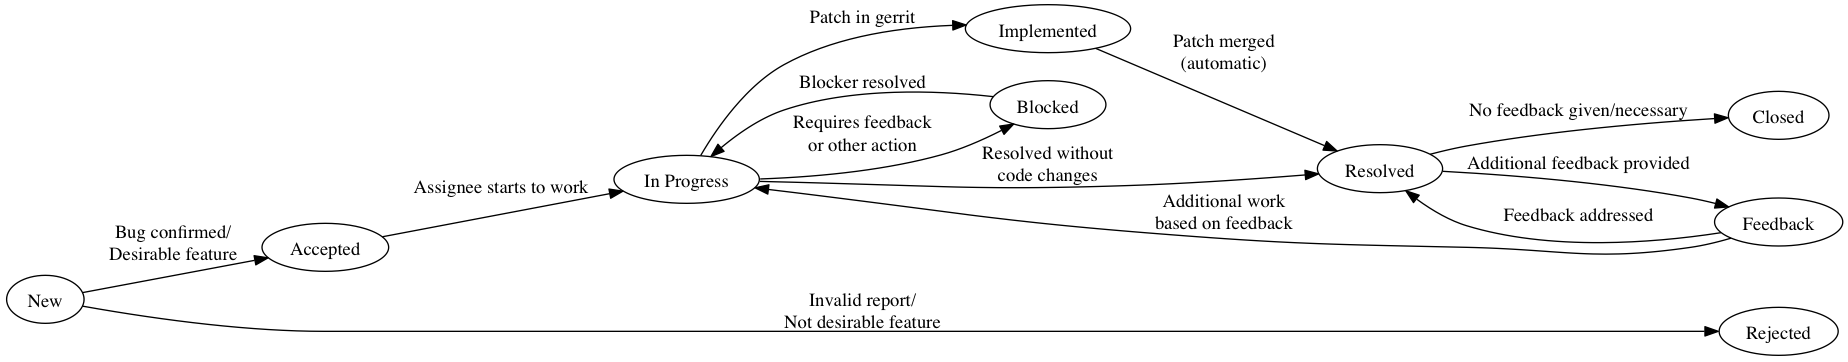 Sample procedure pathway for reported issues.